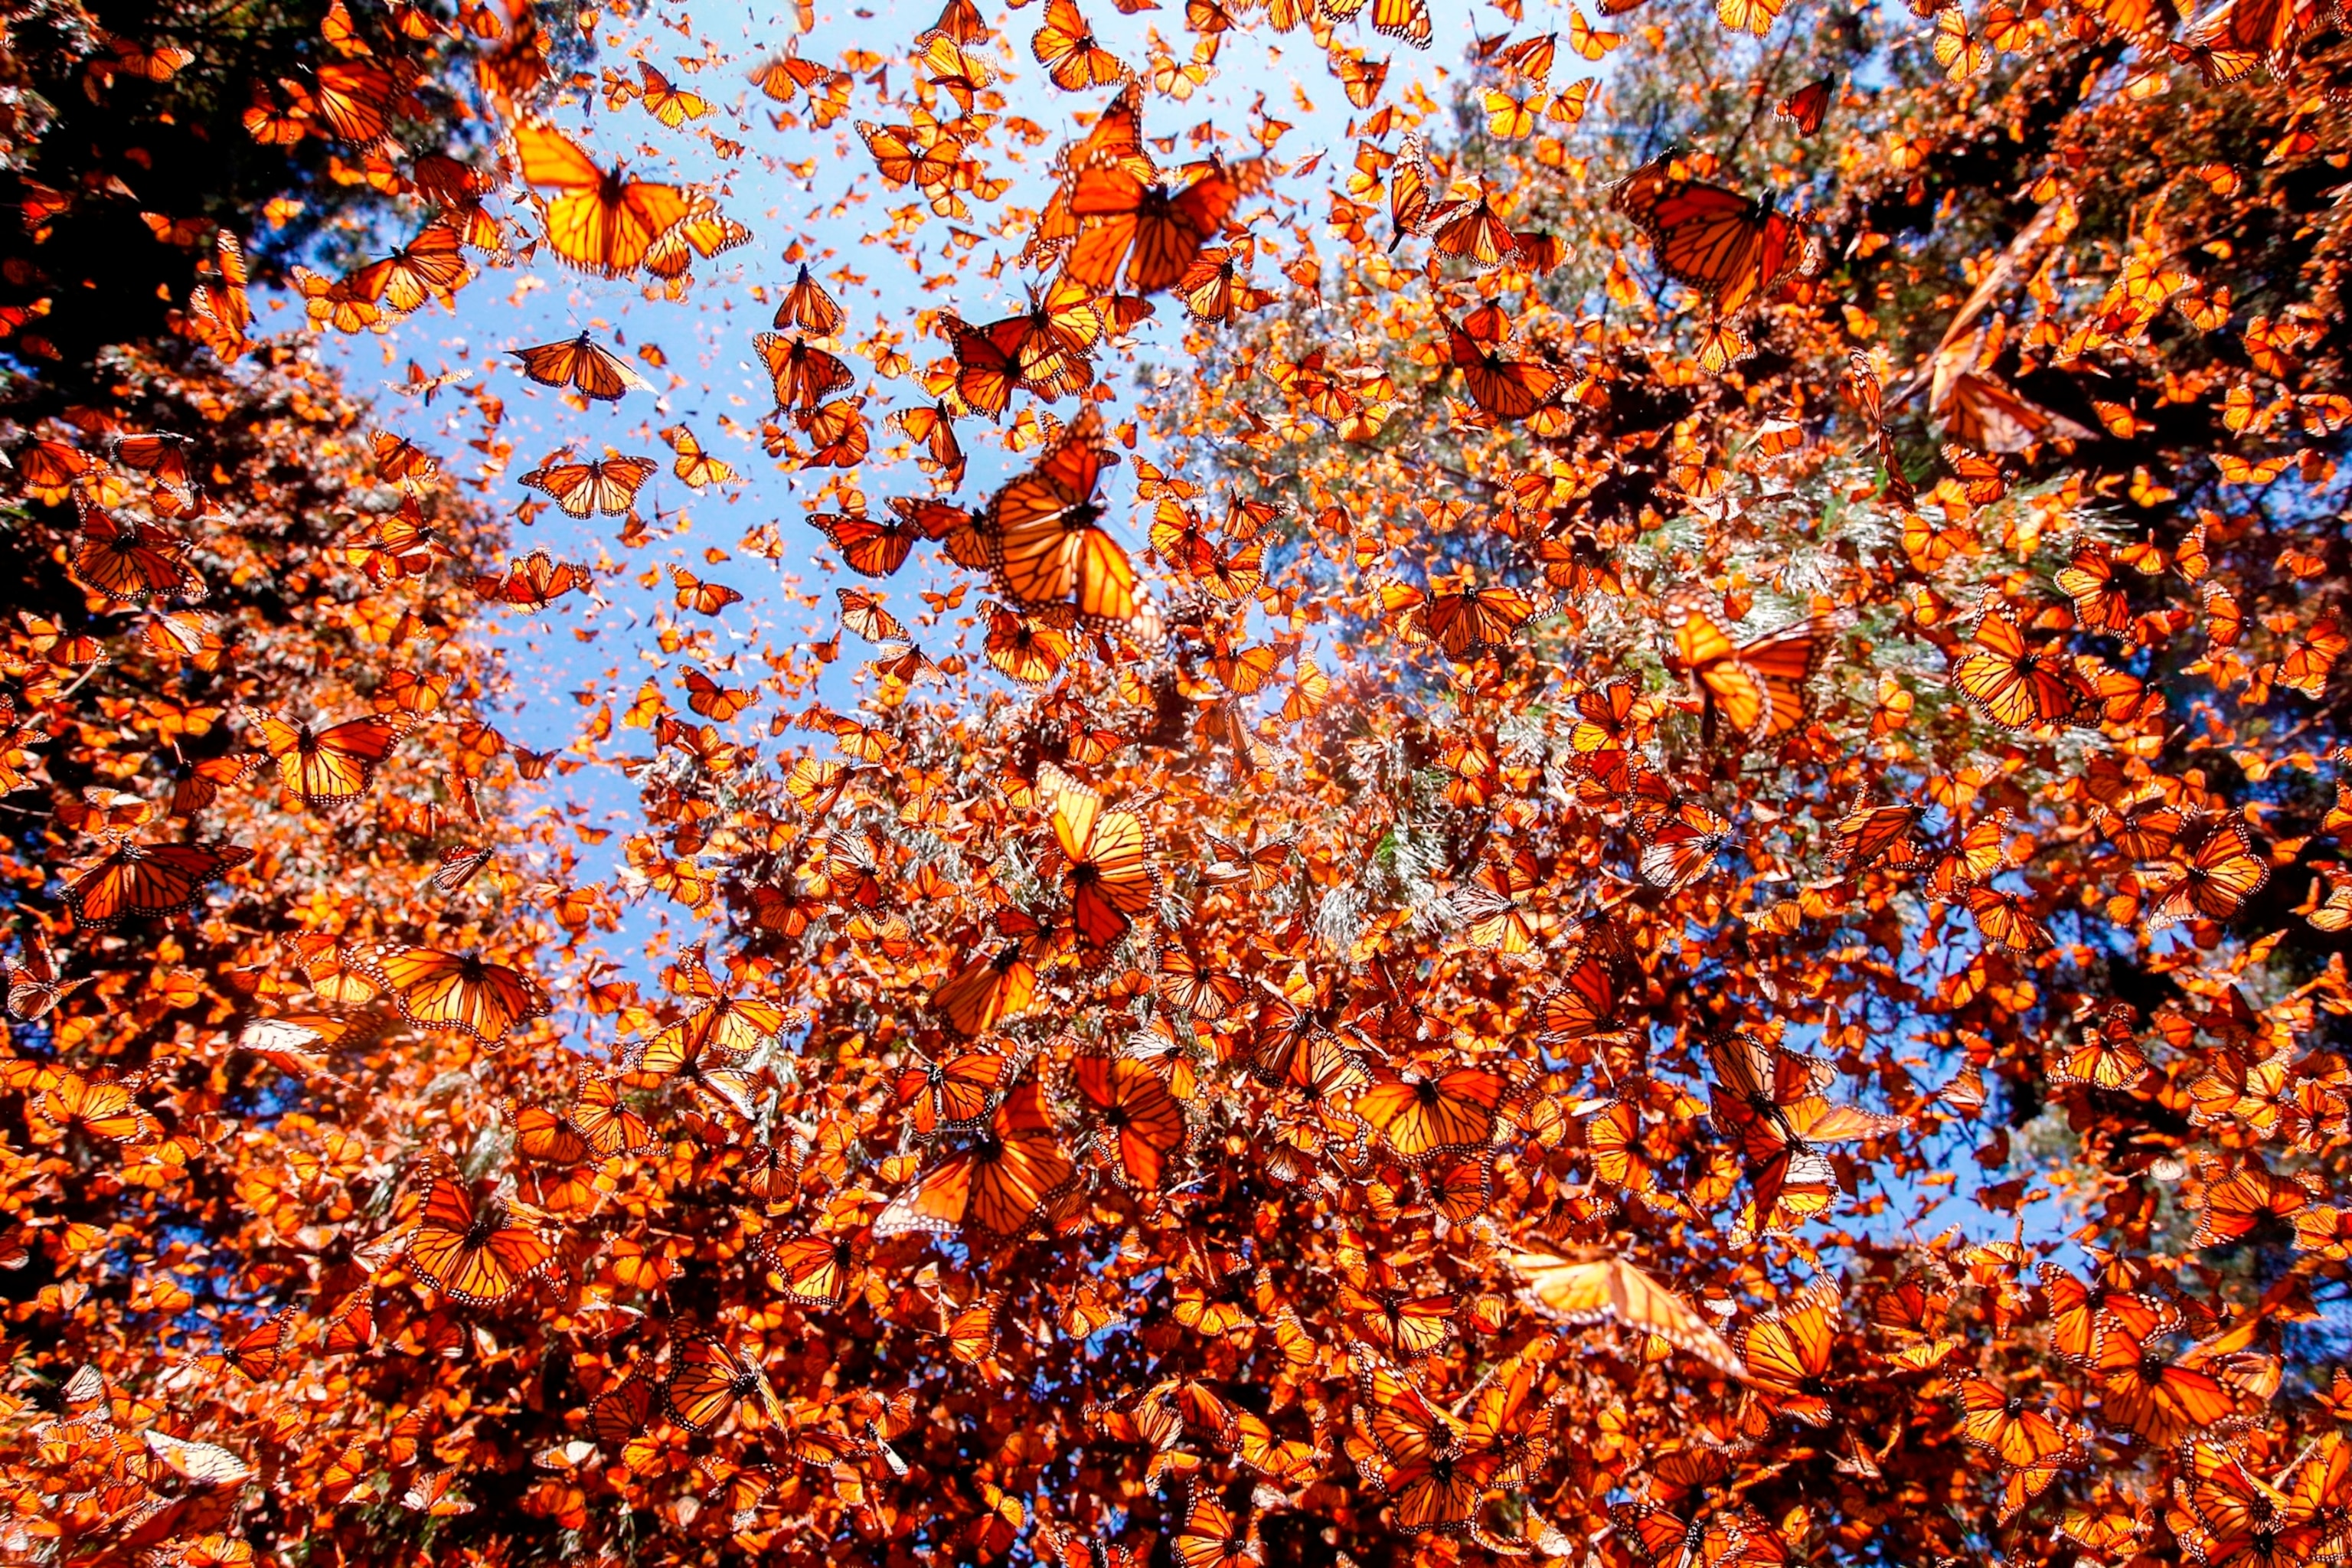 PHOTO: Monarch butterflies are seen flying Feb. 23, 2017 in Michoacan, Mexico. 